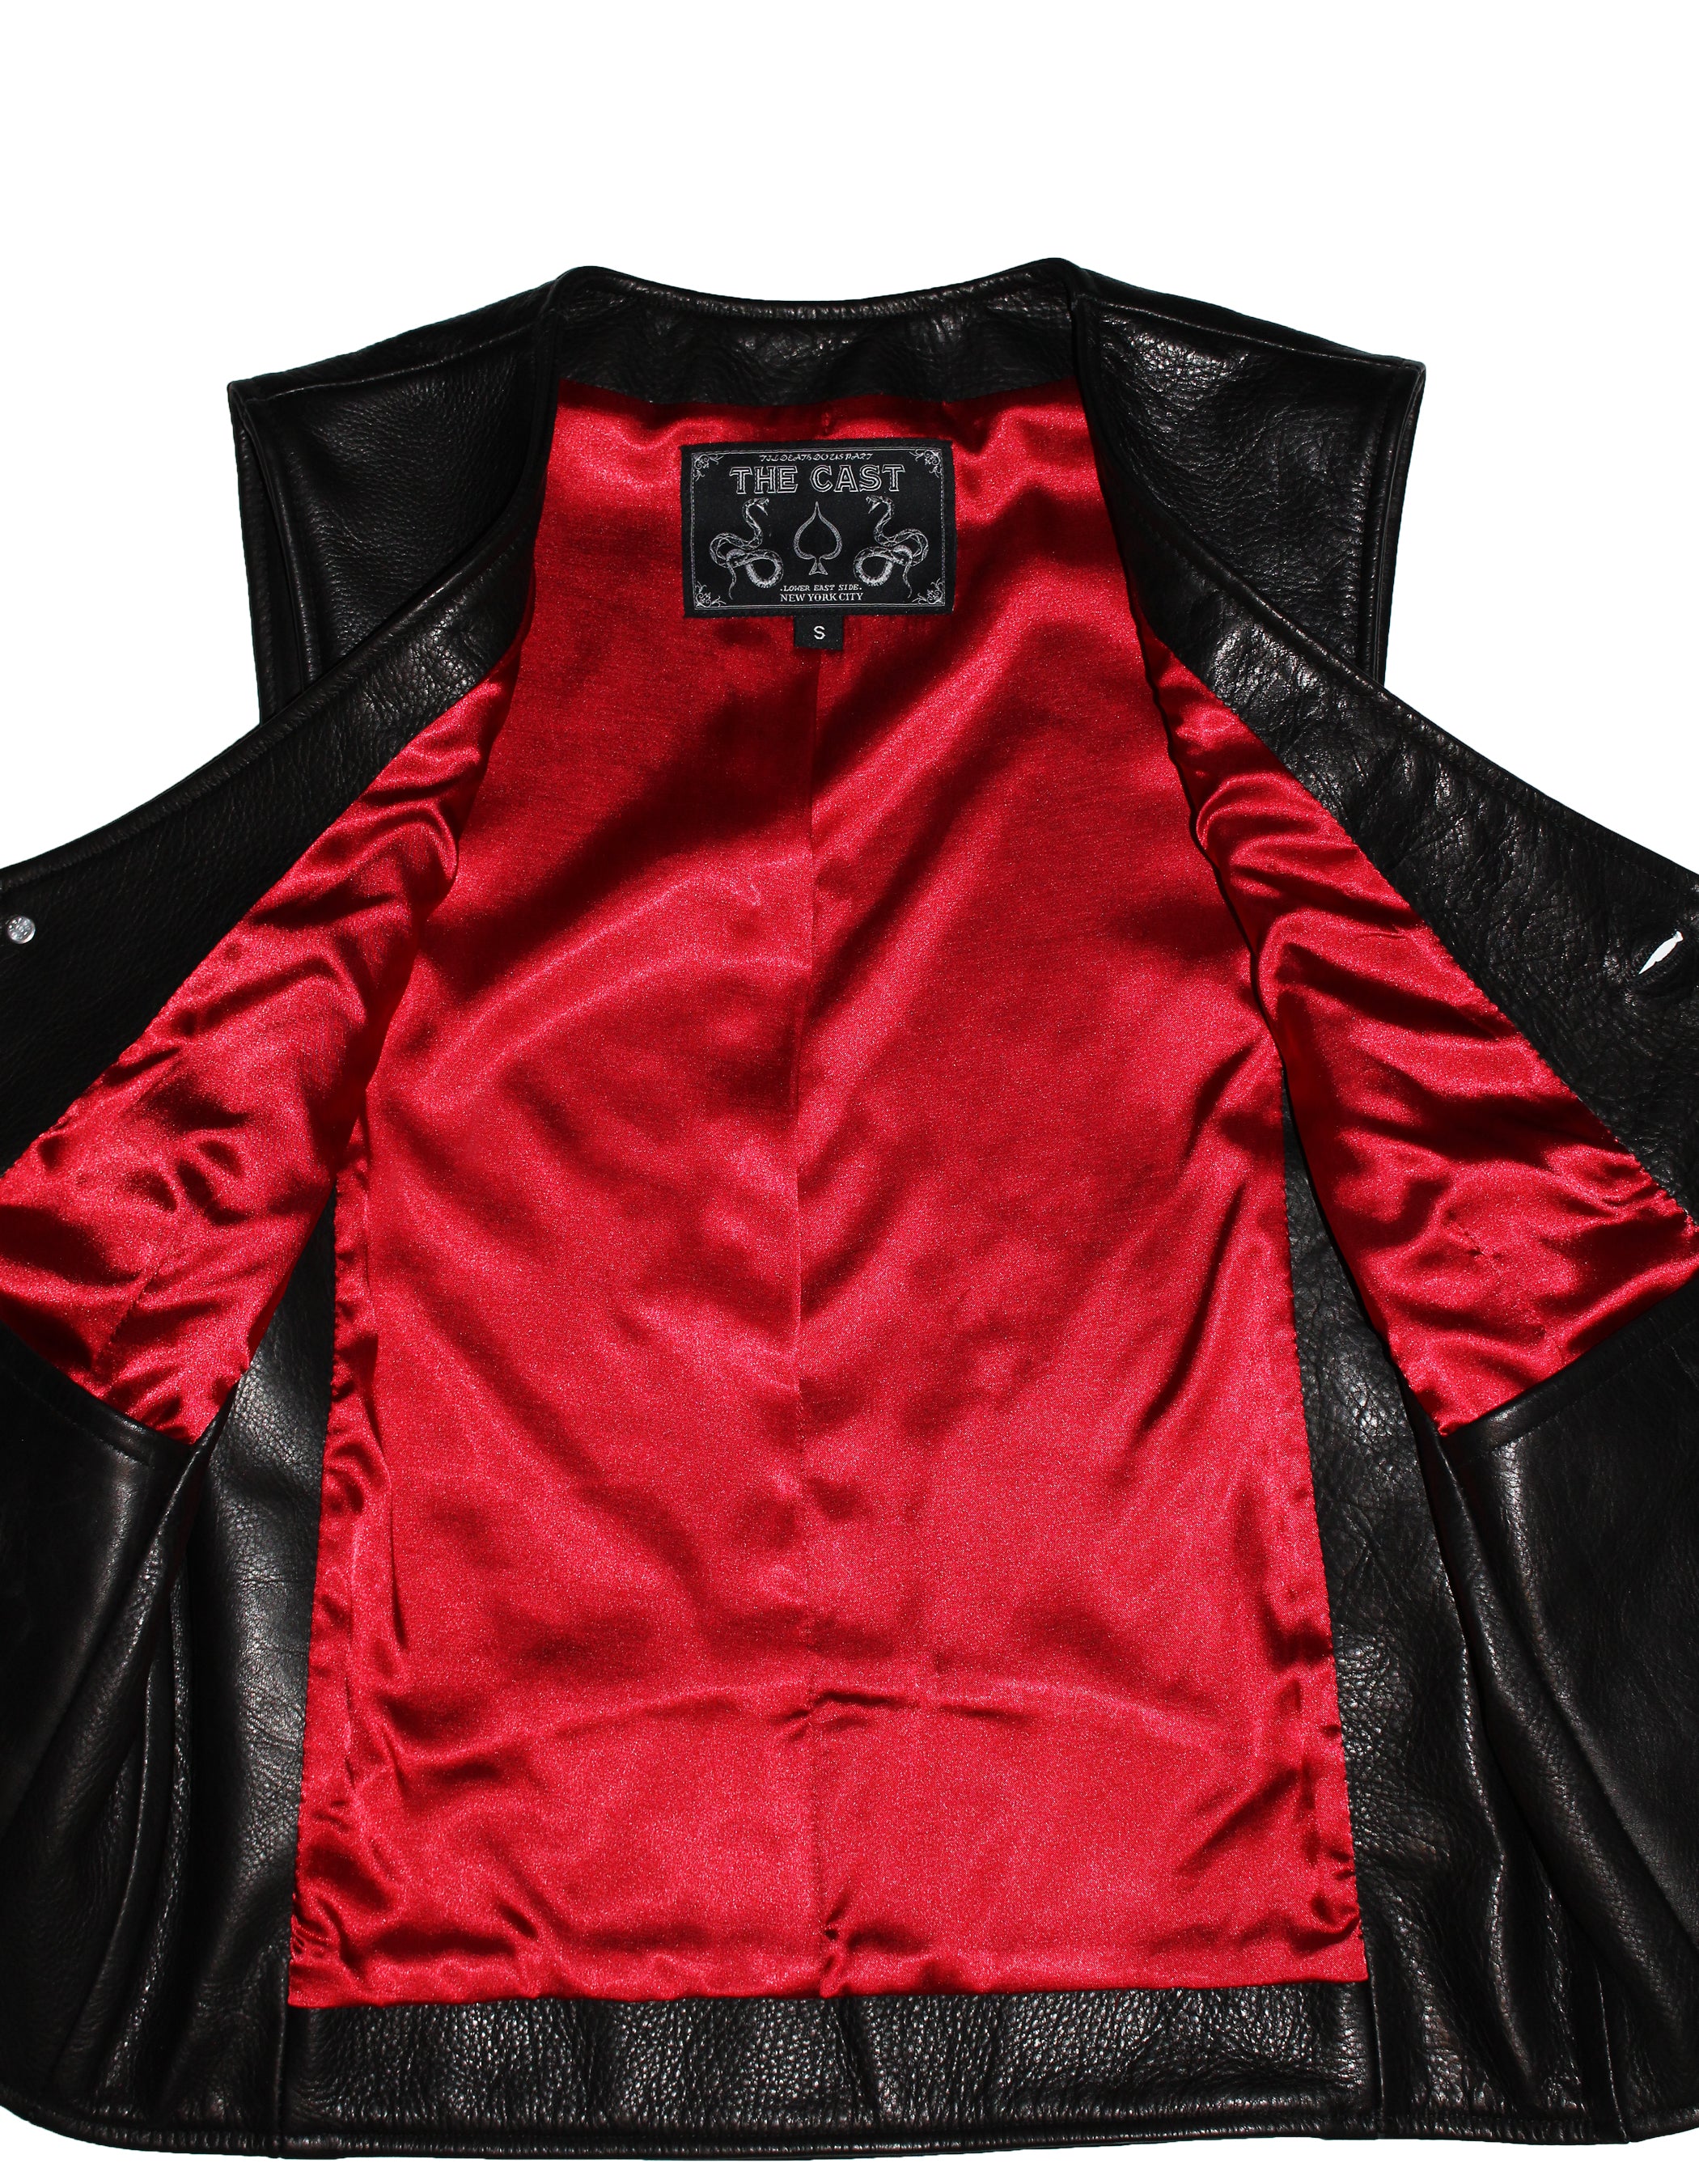 Outlaw Vest - Red Lining